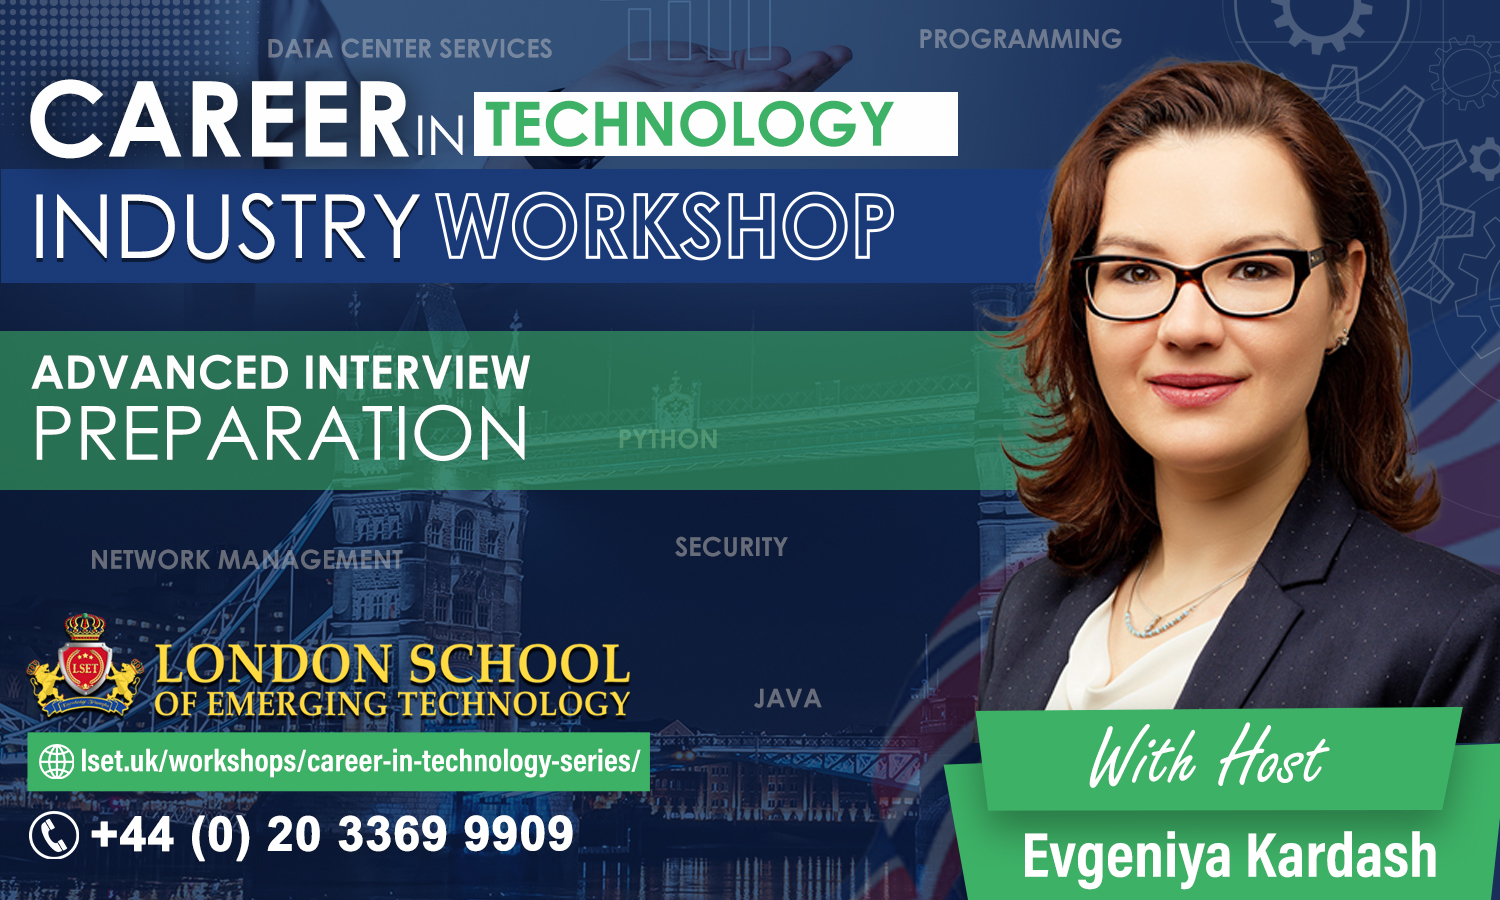 London School of Emerging Technology (LSET) has successfully organised an Advanced Interview Techniques Workshop.